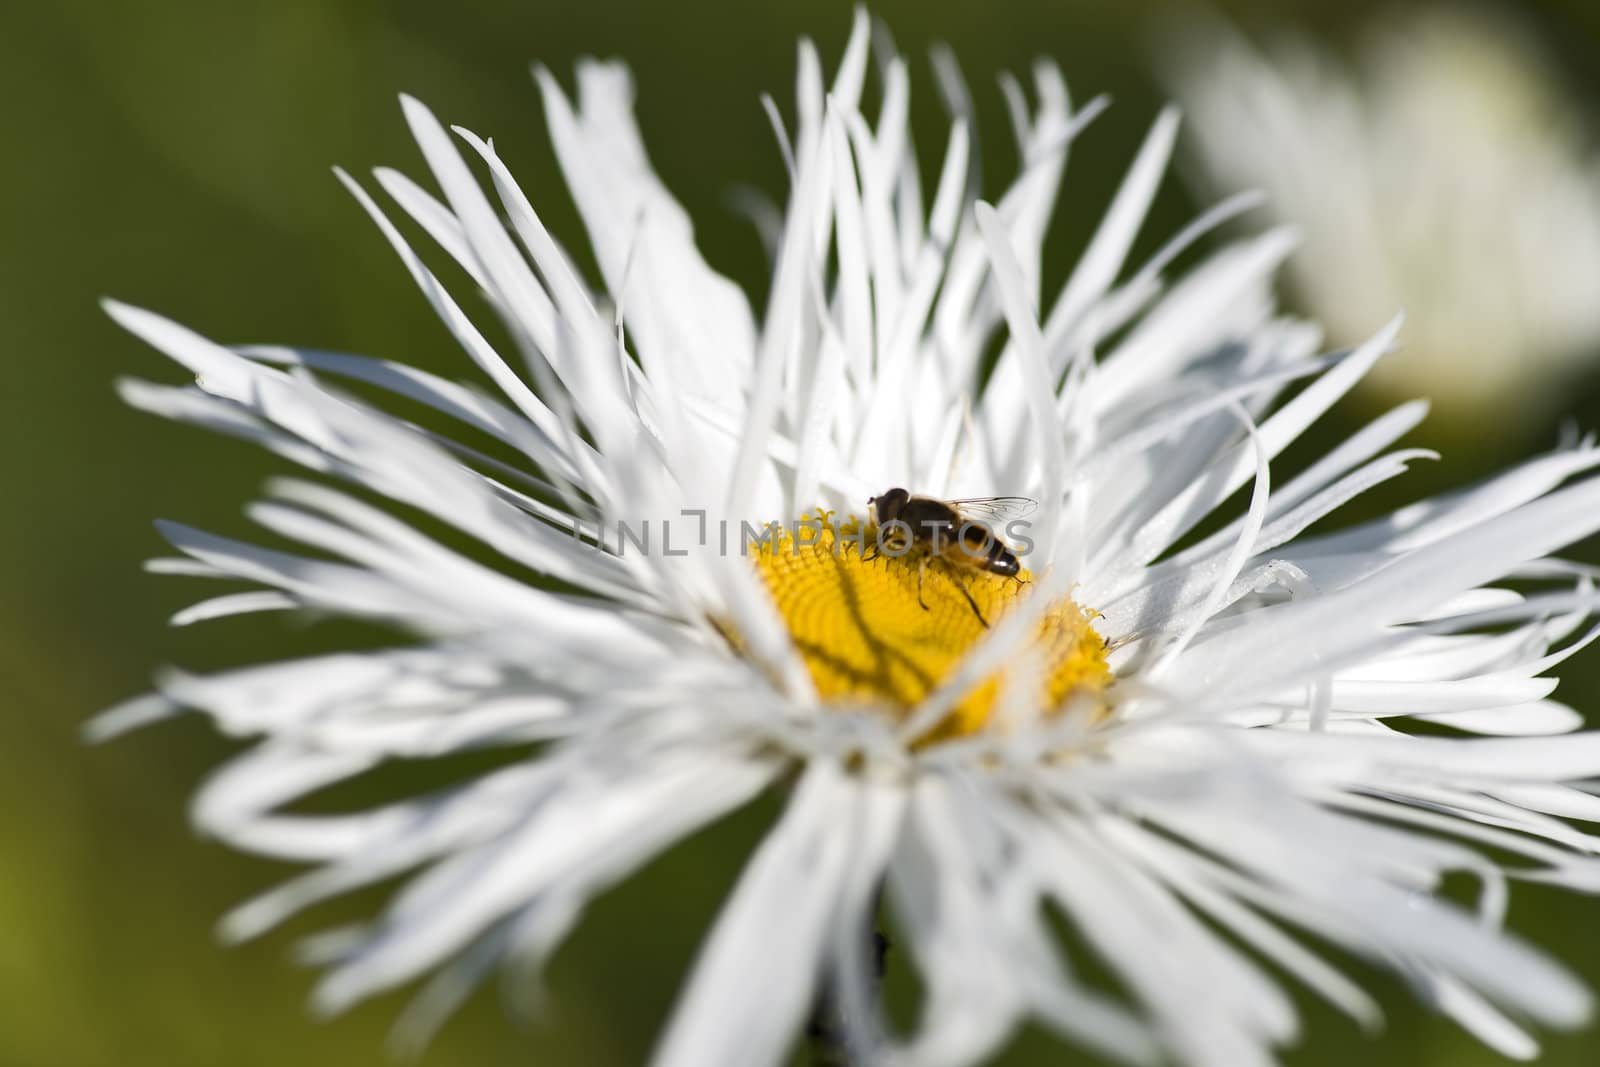 Garden camomile with a fly